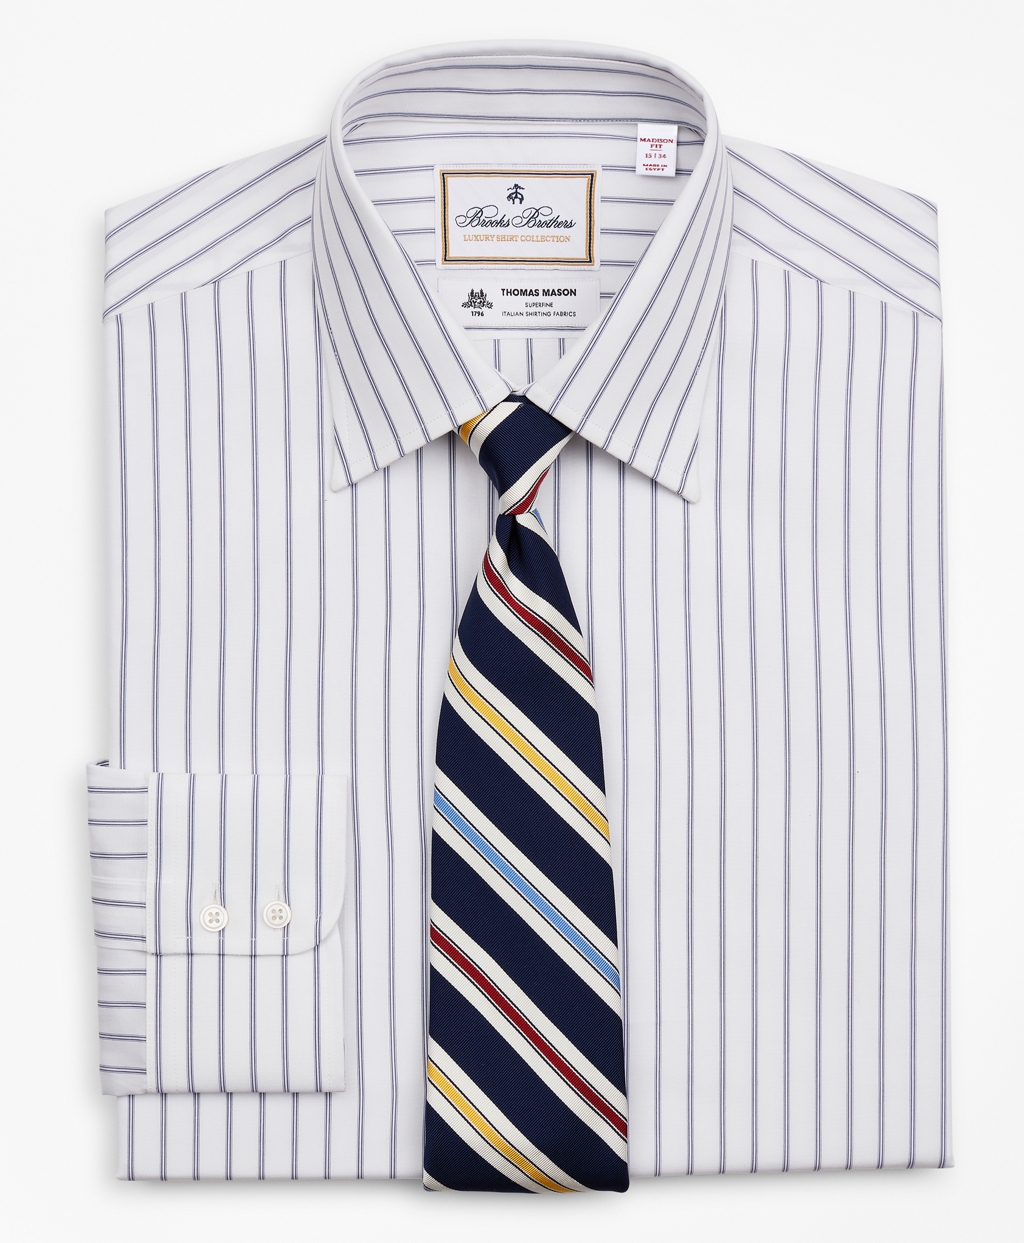 Brooks Brothers Men's Luxury Collection Regular Classic-Fit Dress Shirt, Franklin Spread Collar Micro-Outline Stripe